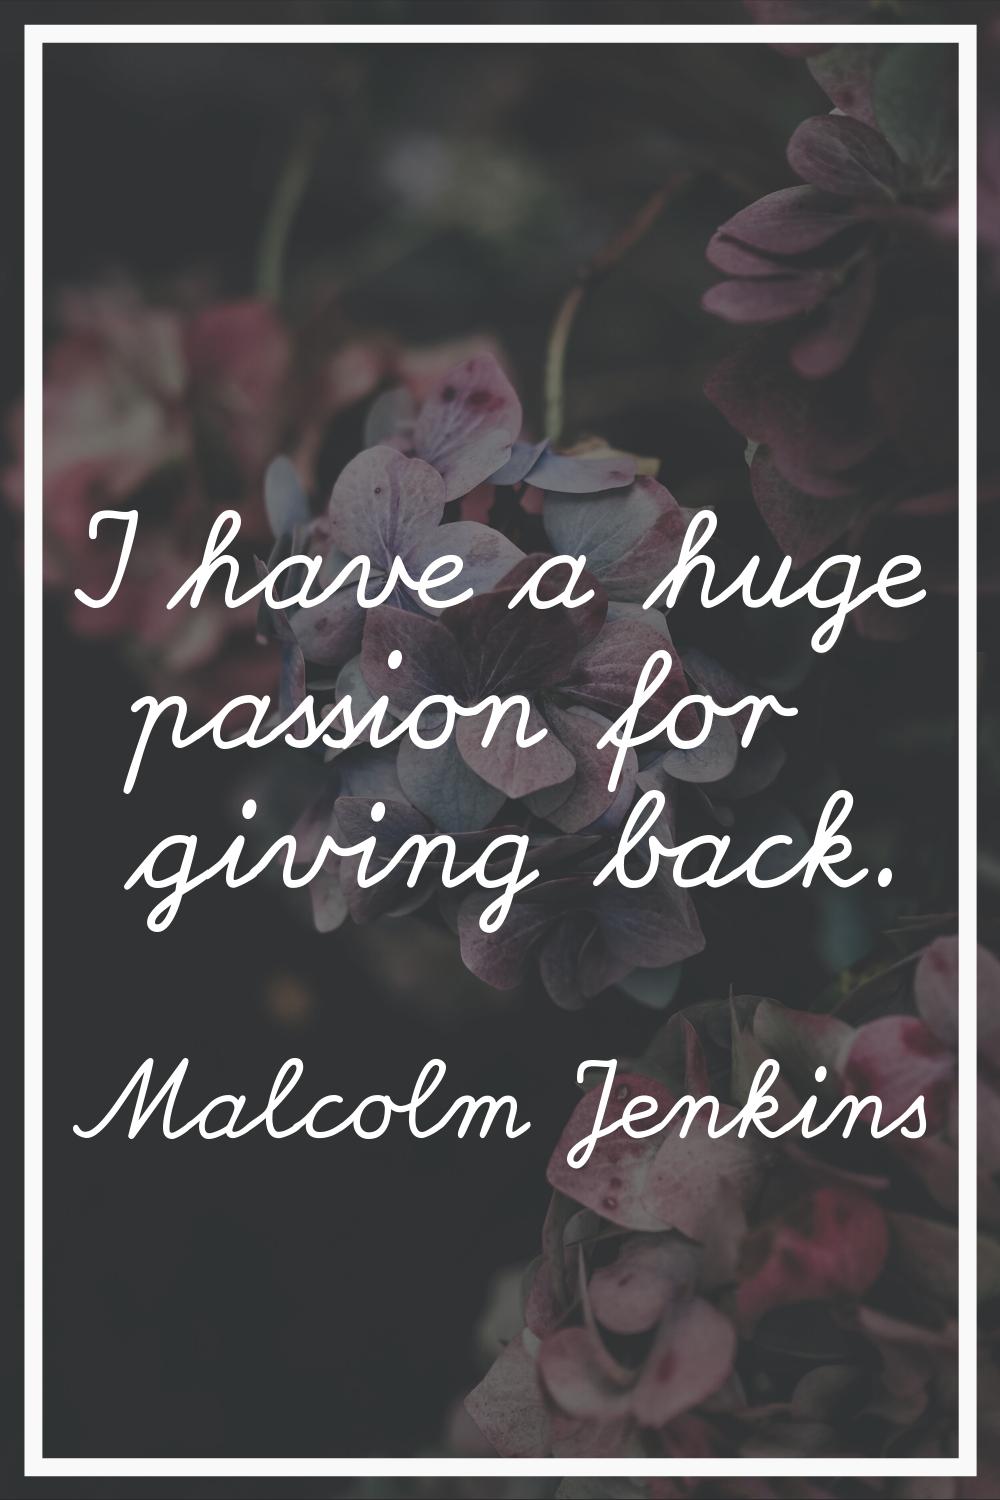 I have a huge passion for giving back.